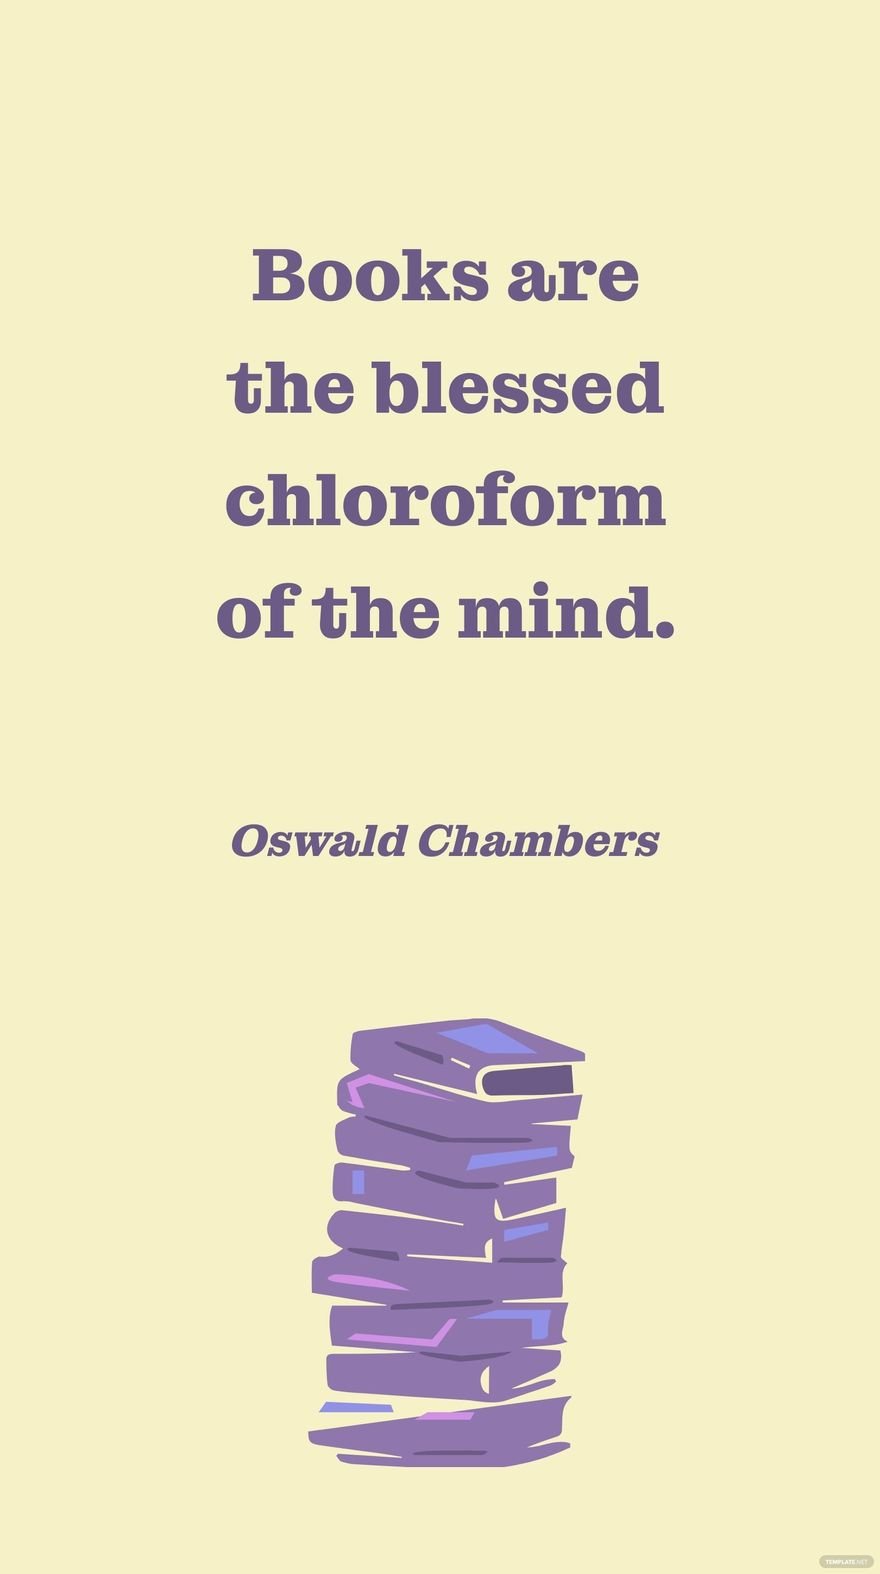 Oswald Chambers - Books are the blessed chloroform of the mind.